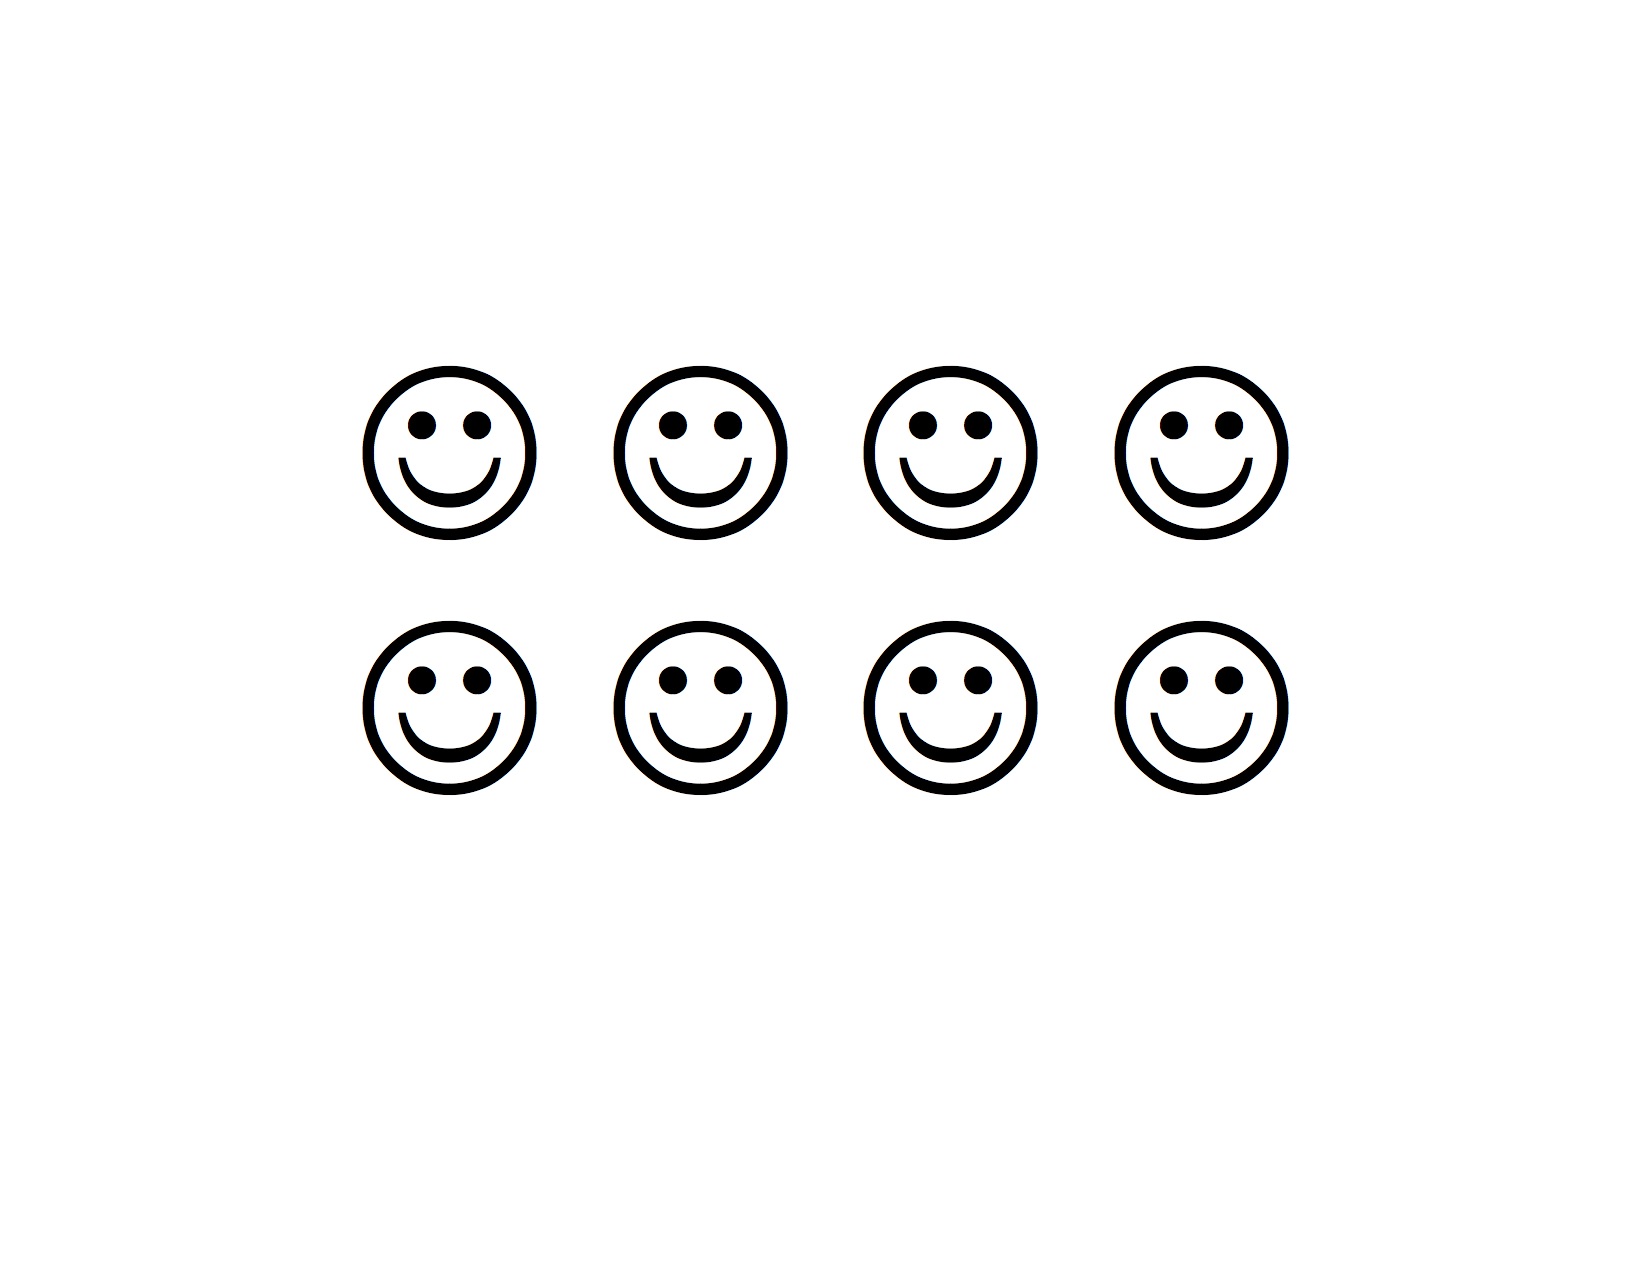 Eight smiley faces arranged in two rows of four.